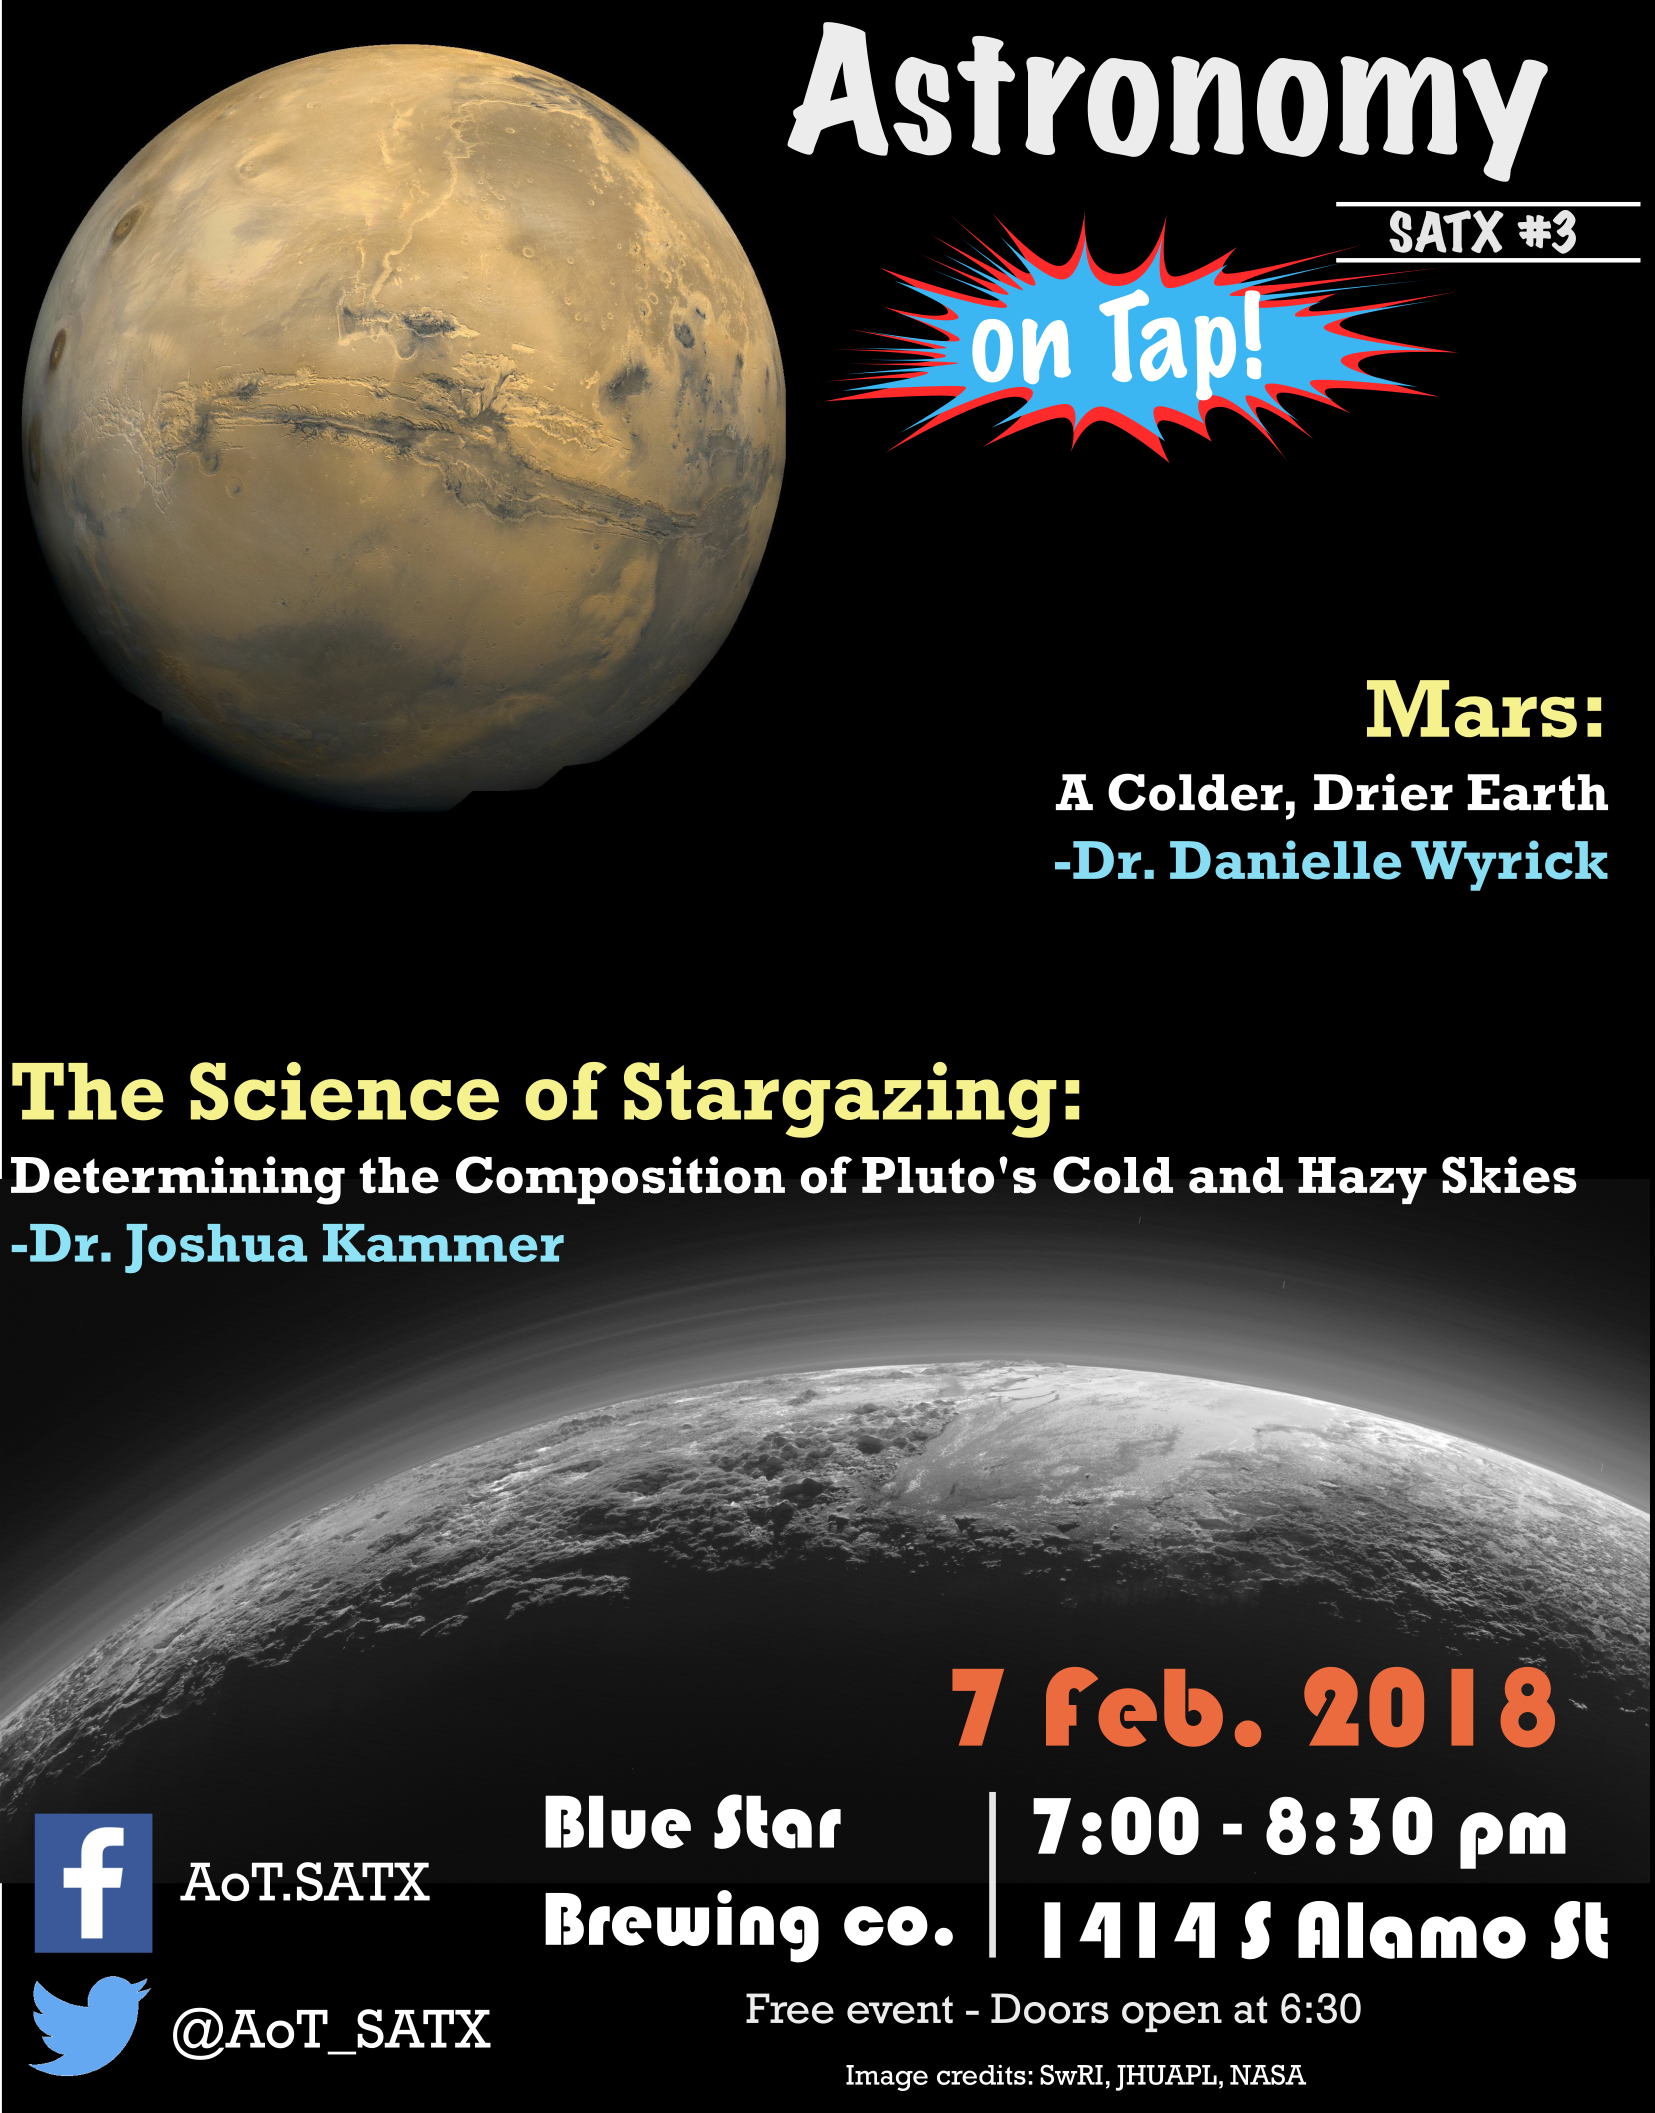 Wed. Feb 7th: AoT SATX #3 - Astronomy On Tap